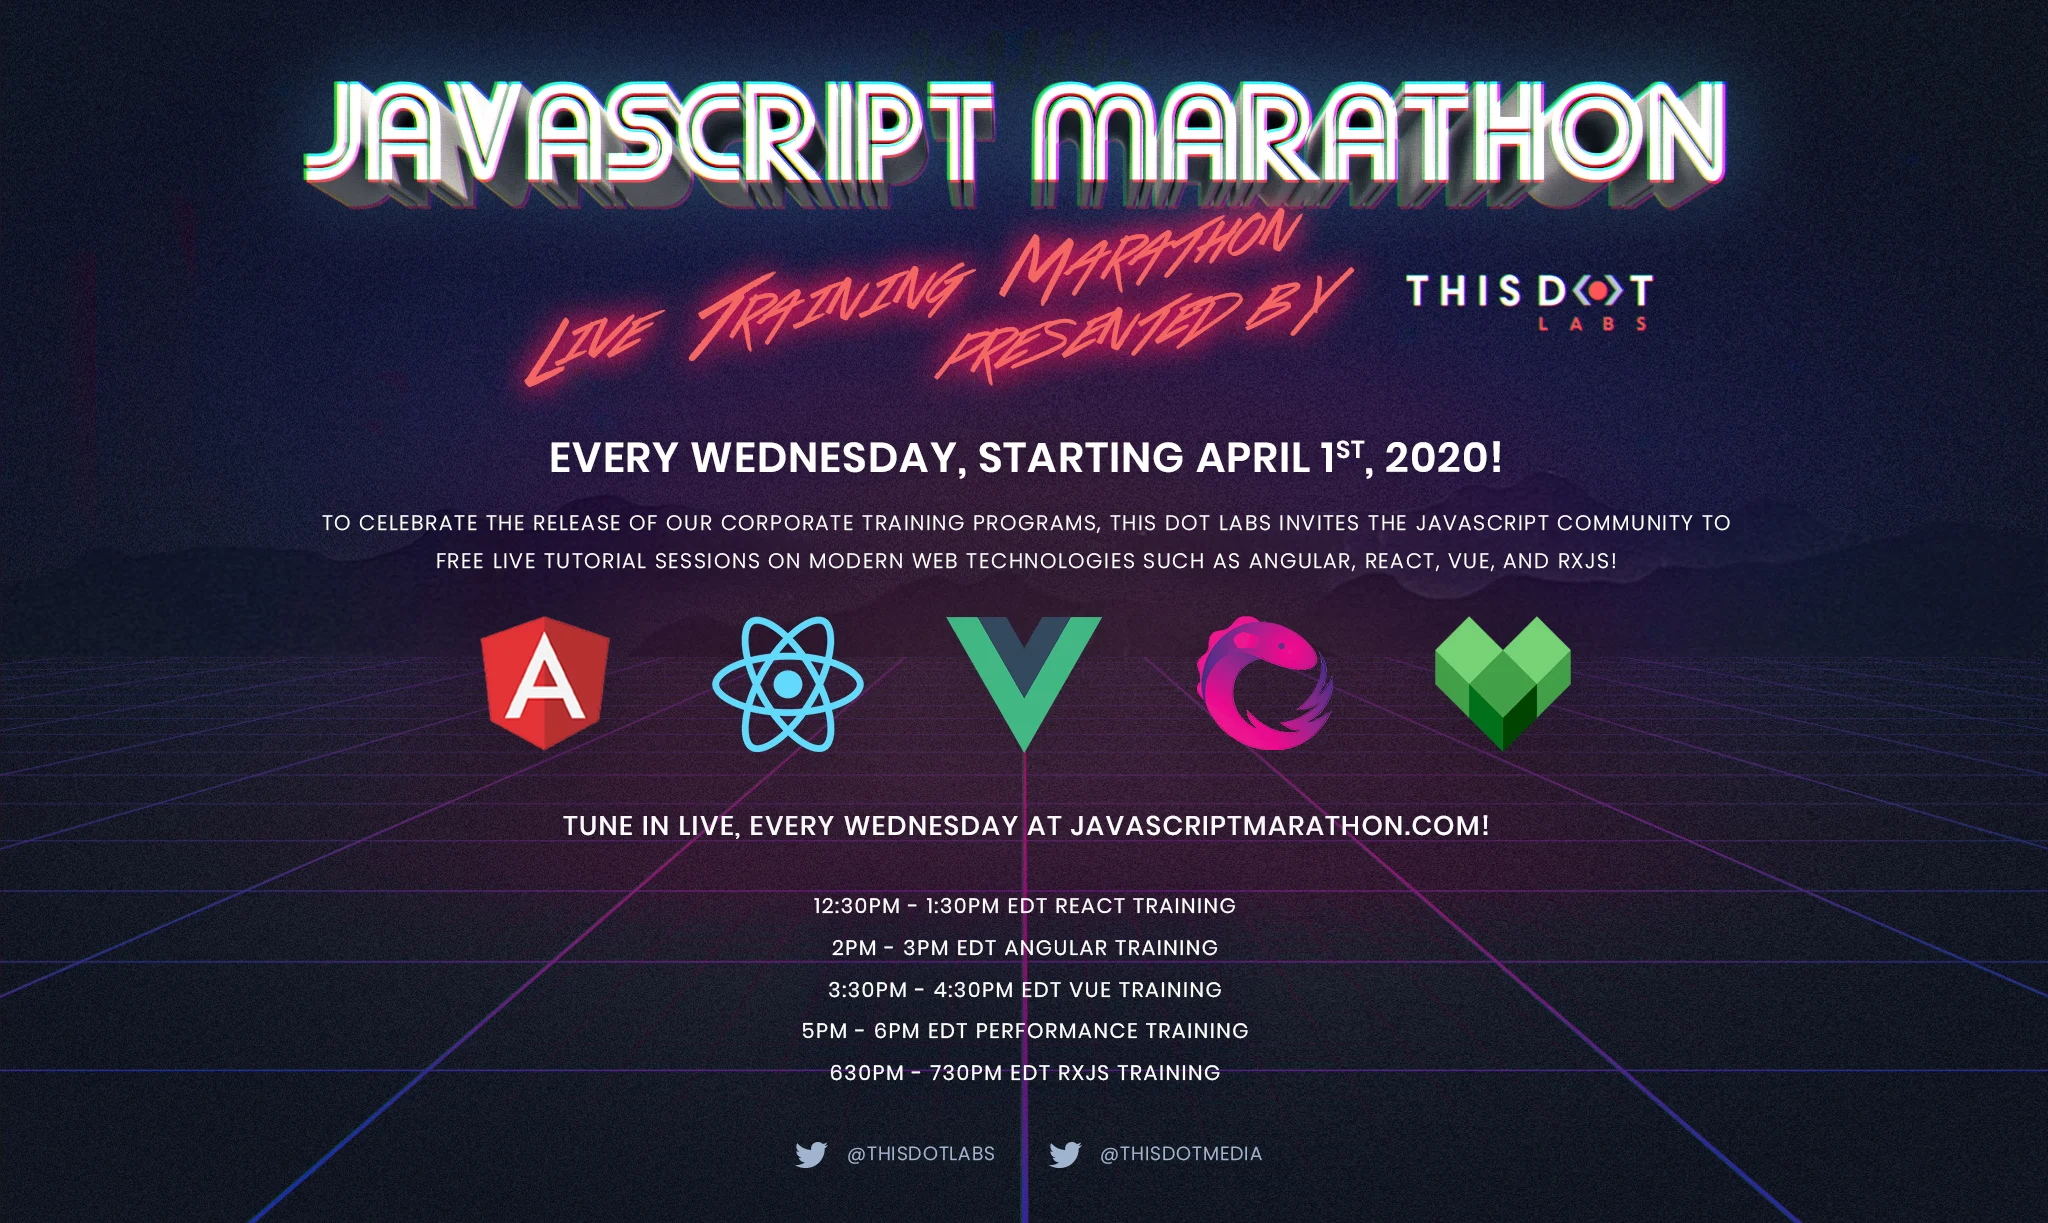 Announcing Free JavaScript Training During the JavaScript Marathon - This Dot Celebrates Remote Corporate Training Courses with Free Classes All April cover image